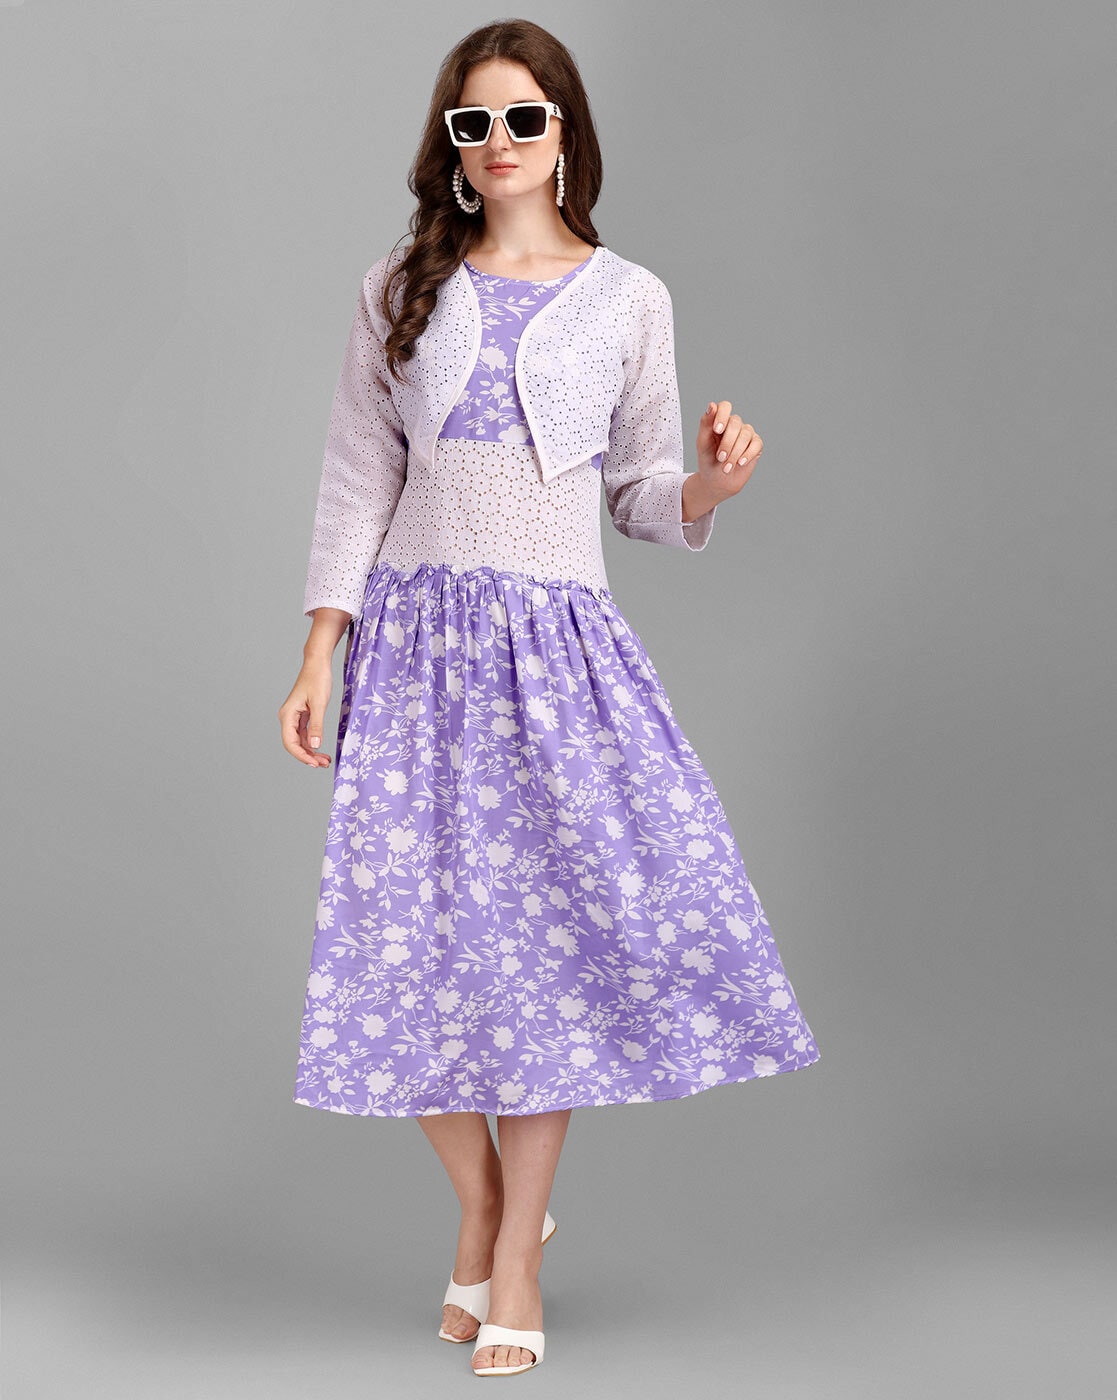 Lavender Label, Name- Green Midi Dress Product details- - Price ₹1000 free  shipping - Lining- not added ; lining can be added at ₹250 extra -  fabric